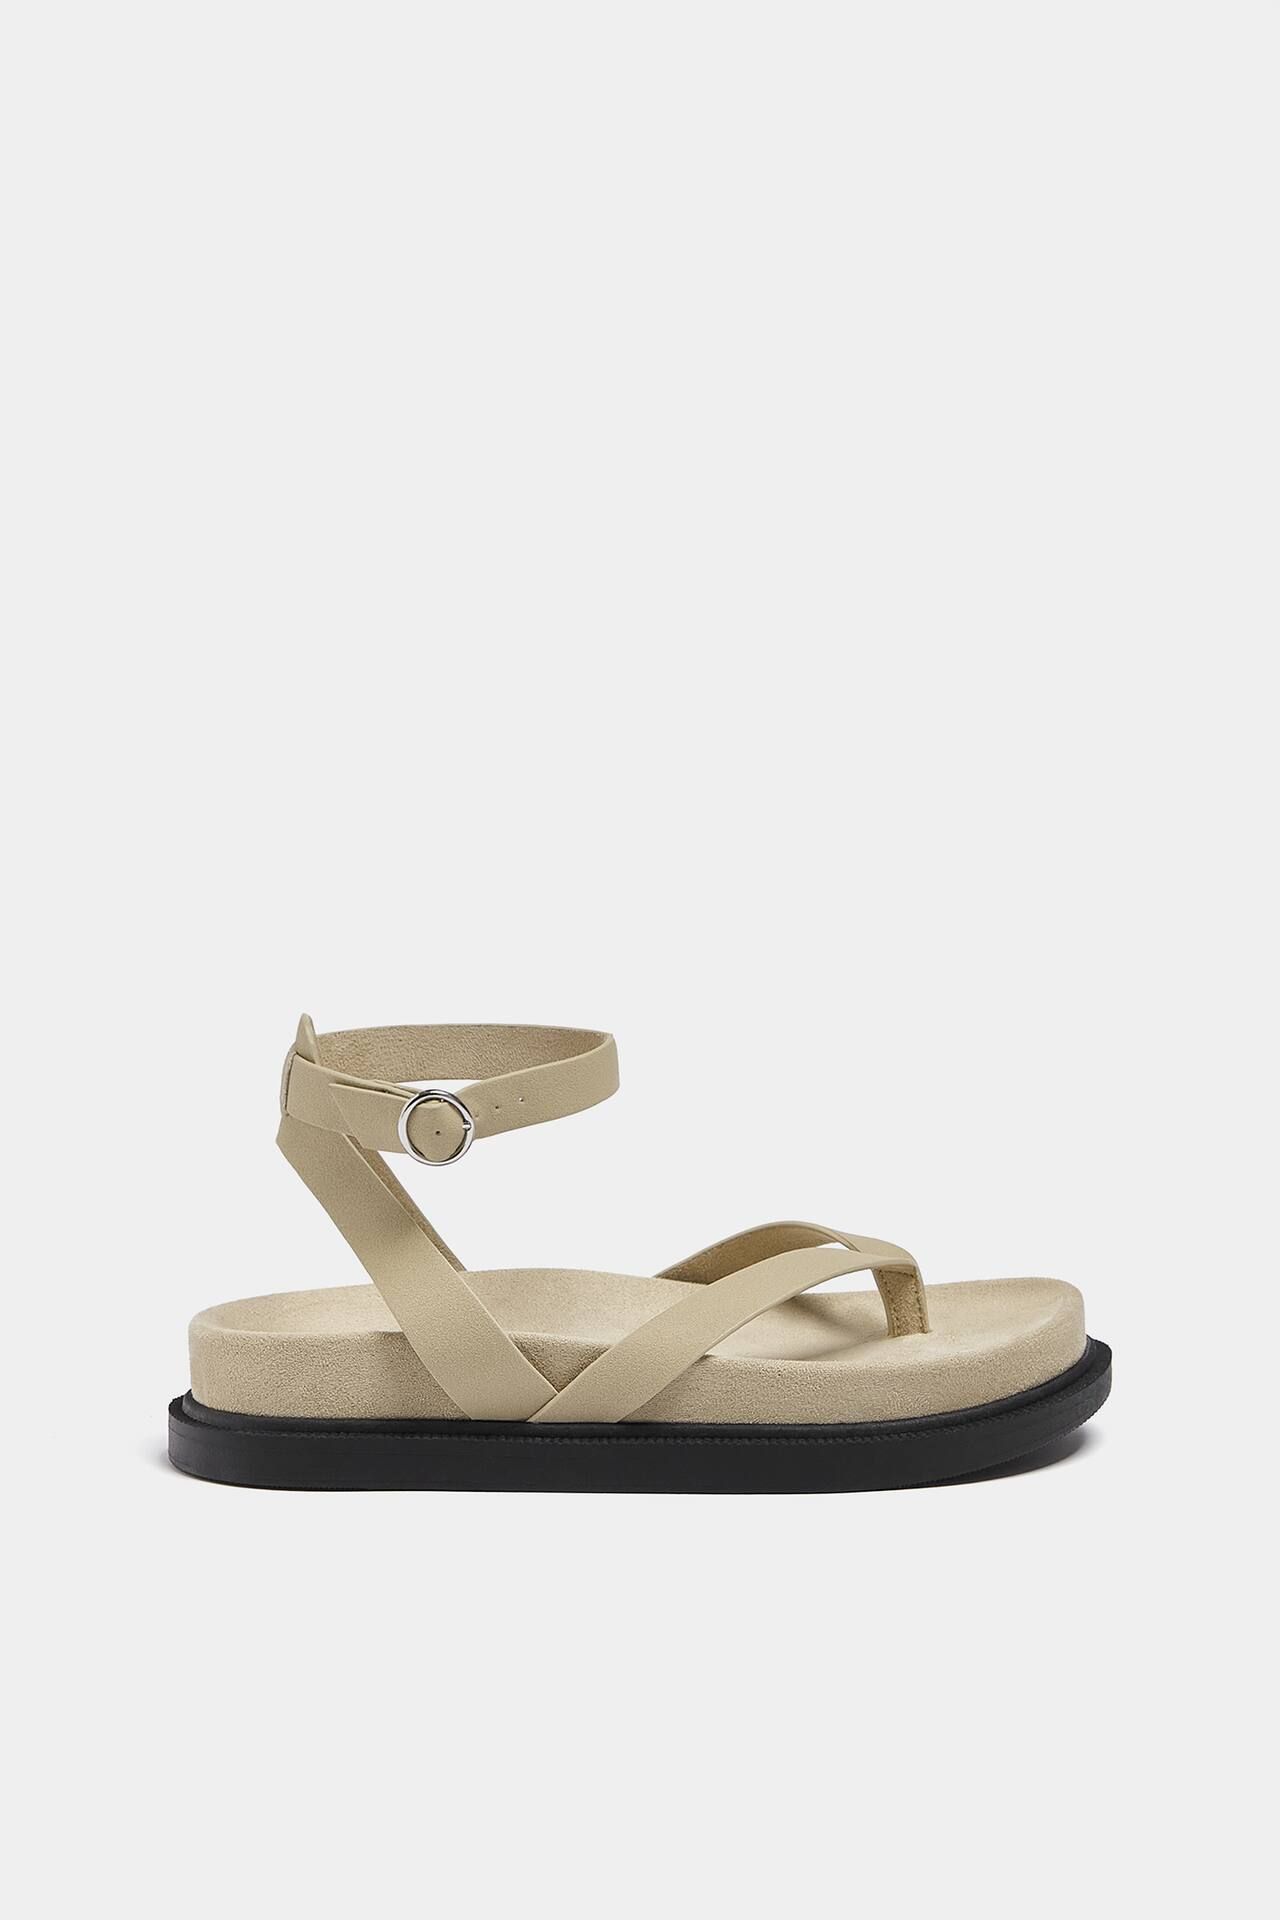 Urban strappy sandals | PULL and BEAR UK